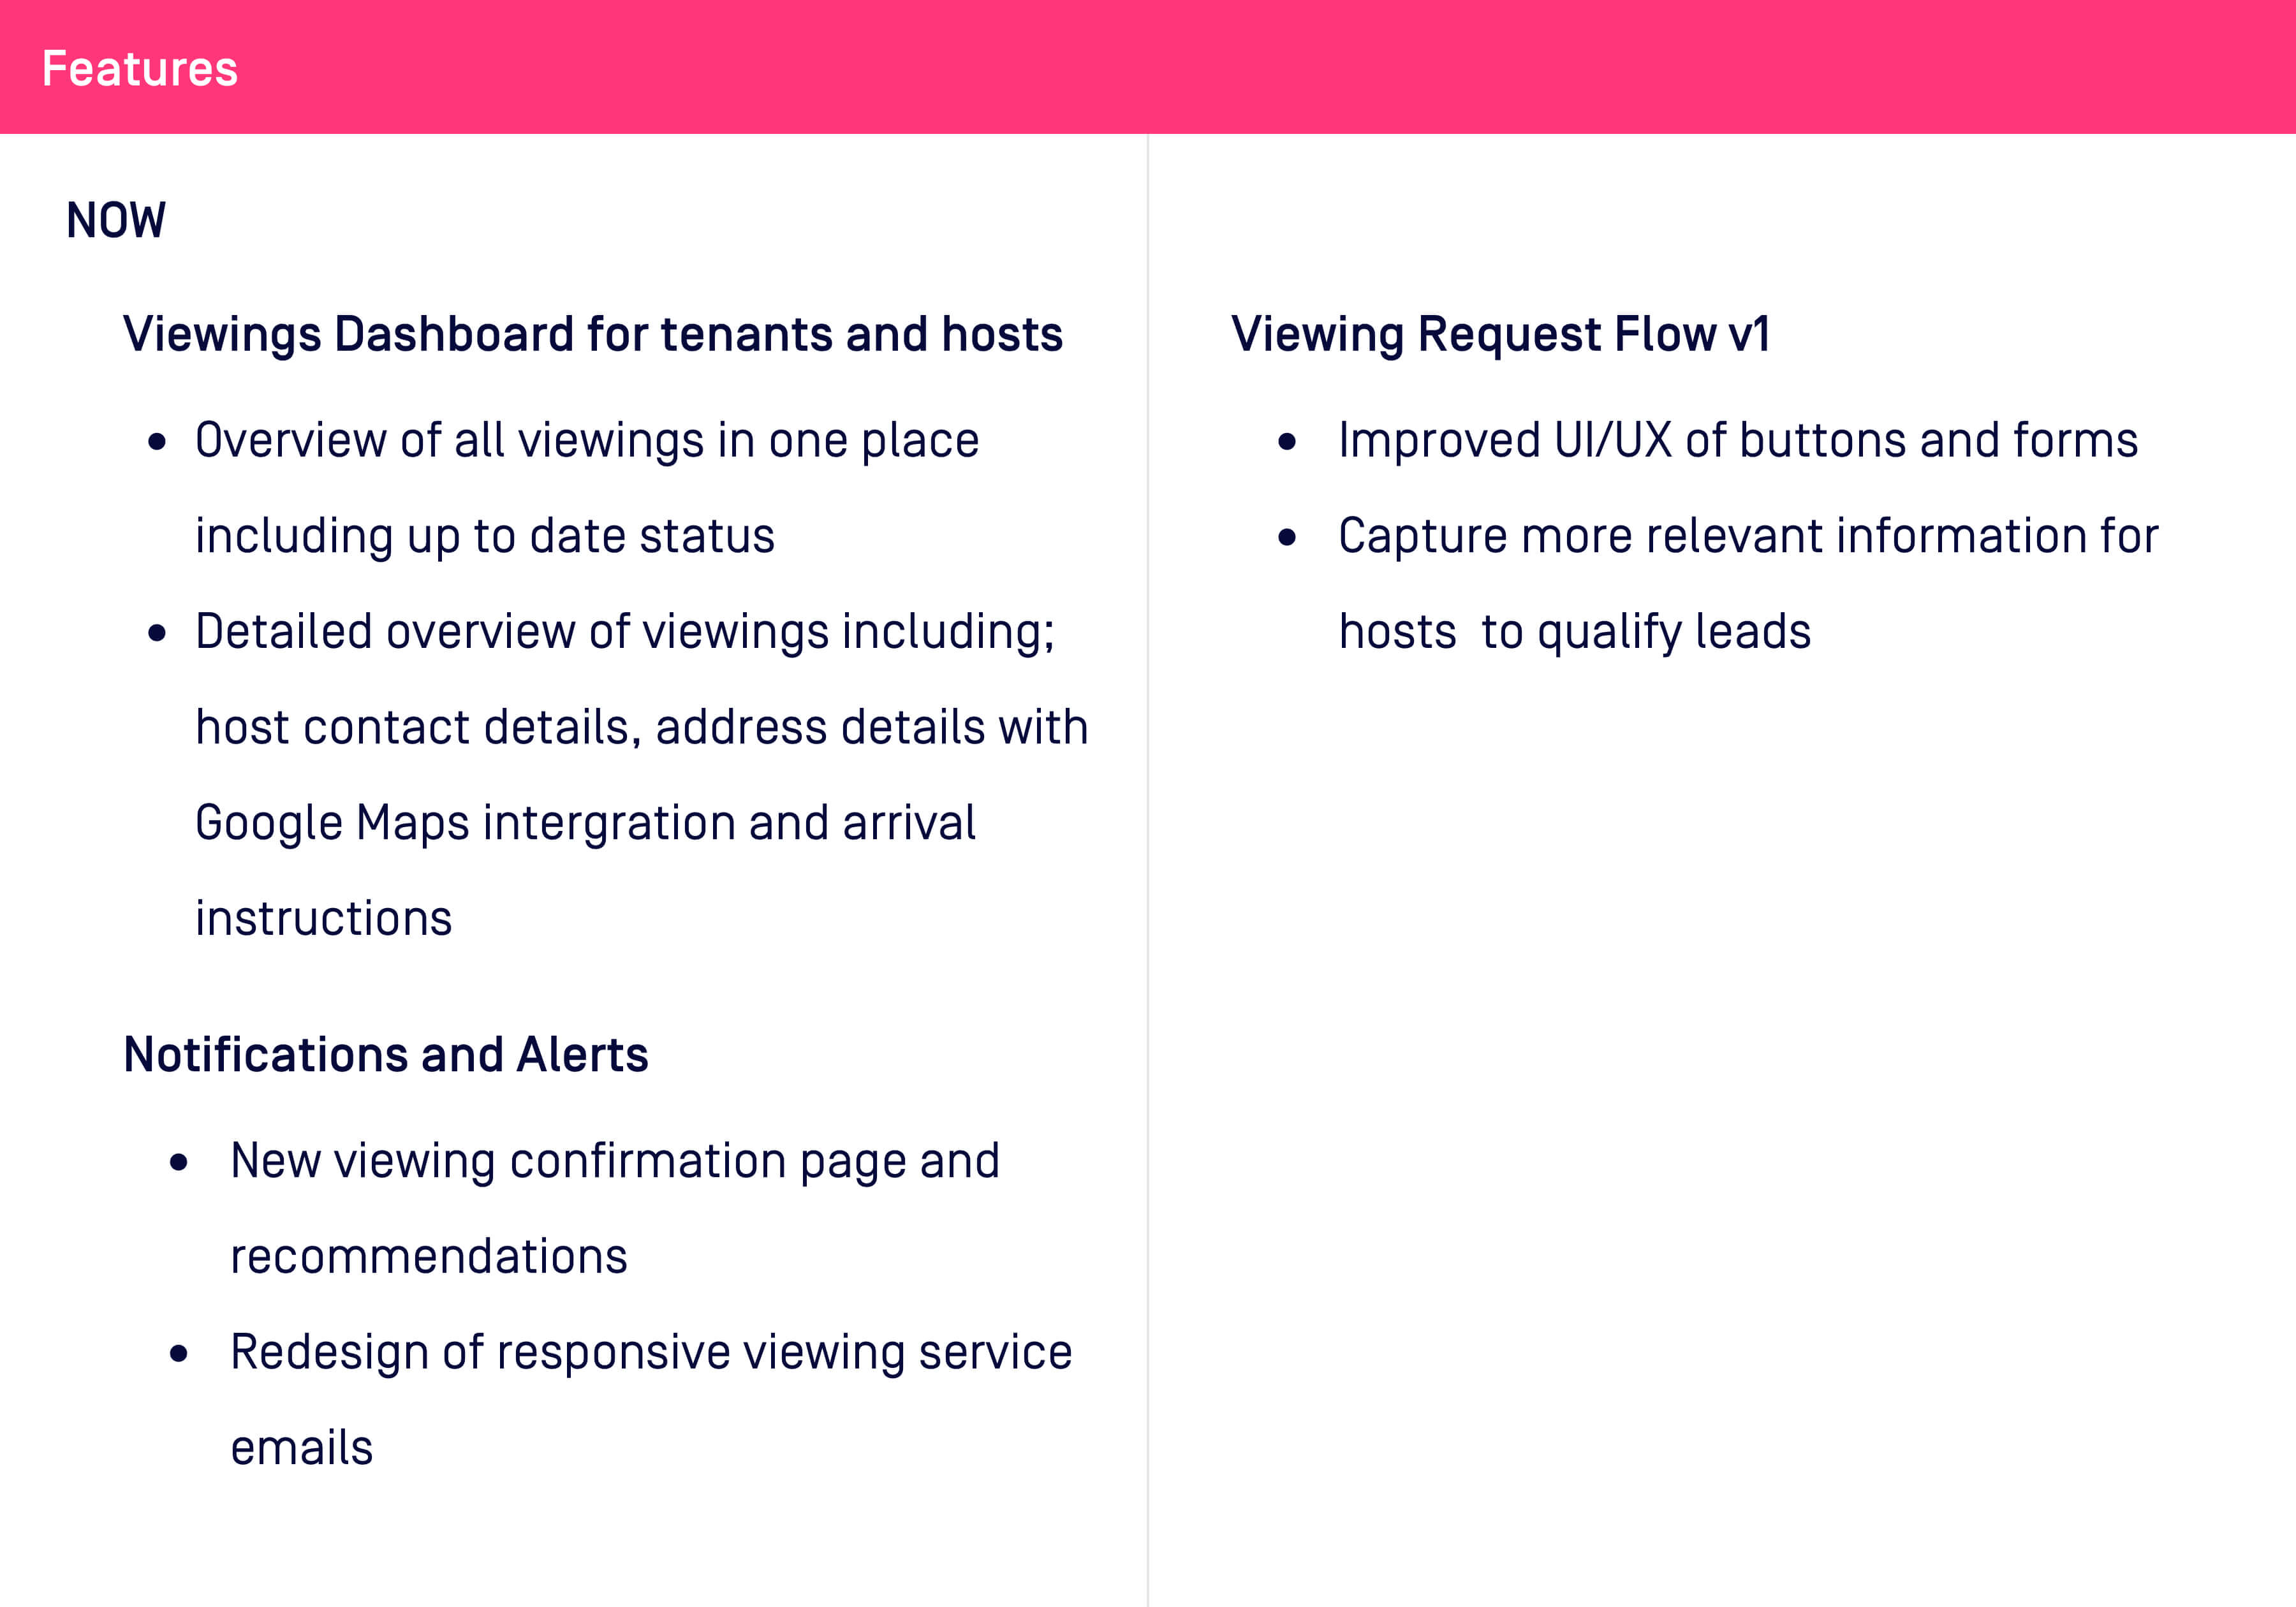 HubbleHQ Viewings feature prioritisation